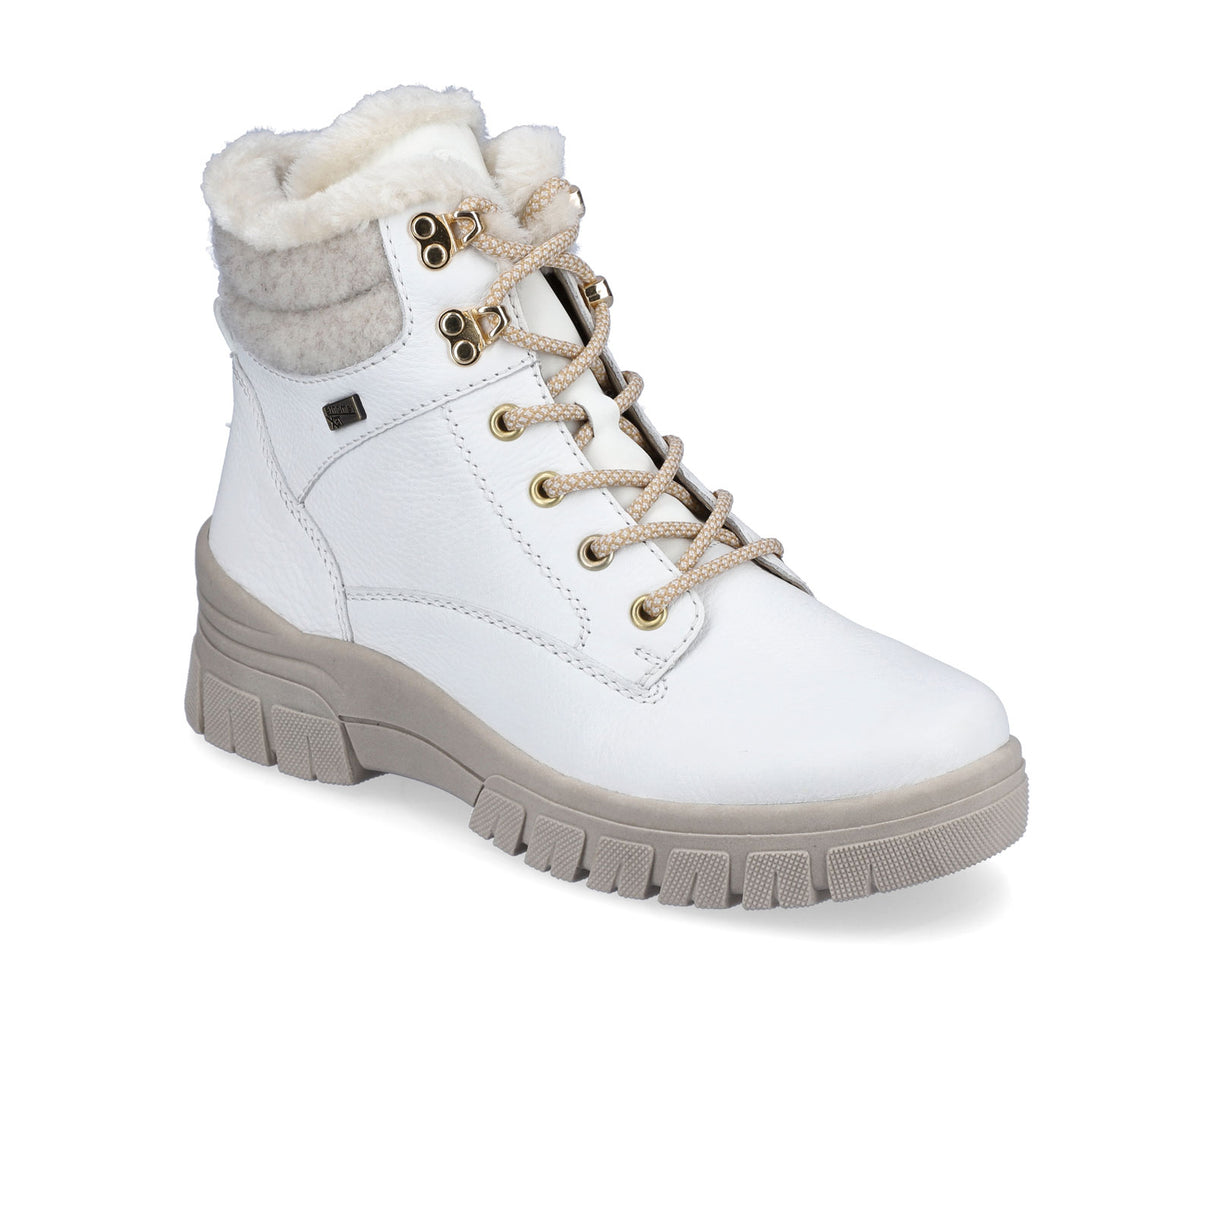 Remonte Evi D0E71-80 Mid Winter Boot (Women) - Weiss/Sand/Off White/Bianco Boots - Winter - Mid Boot - The Heel Shoe Fitters